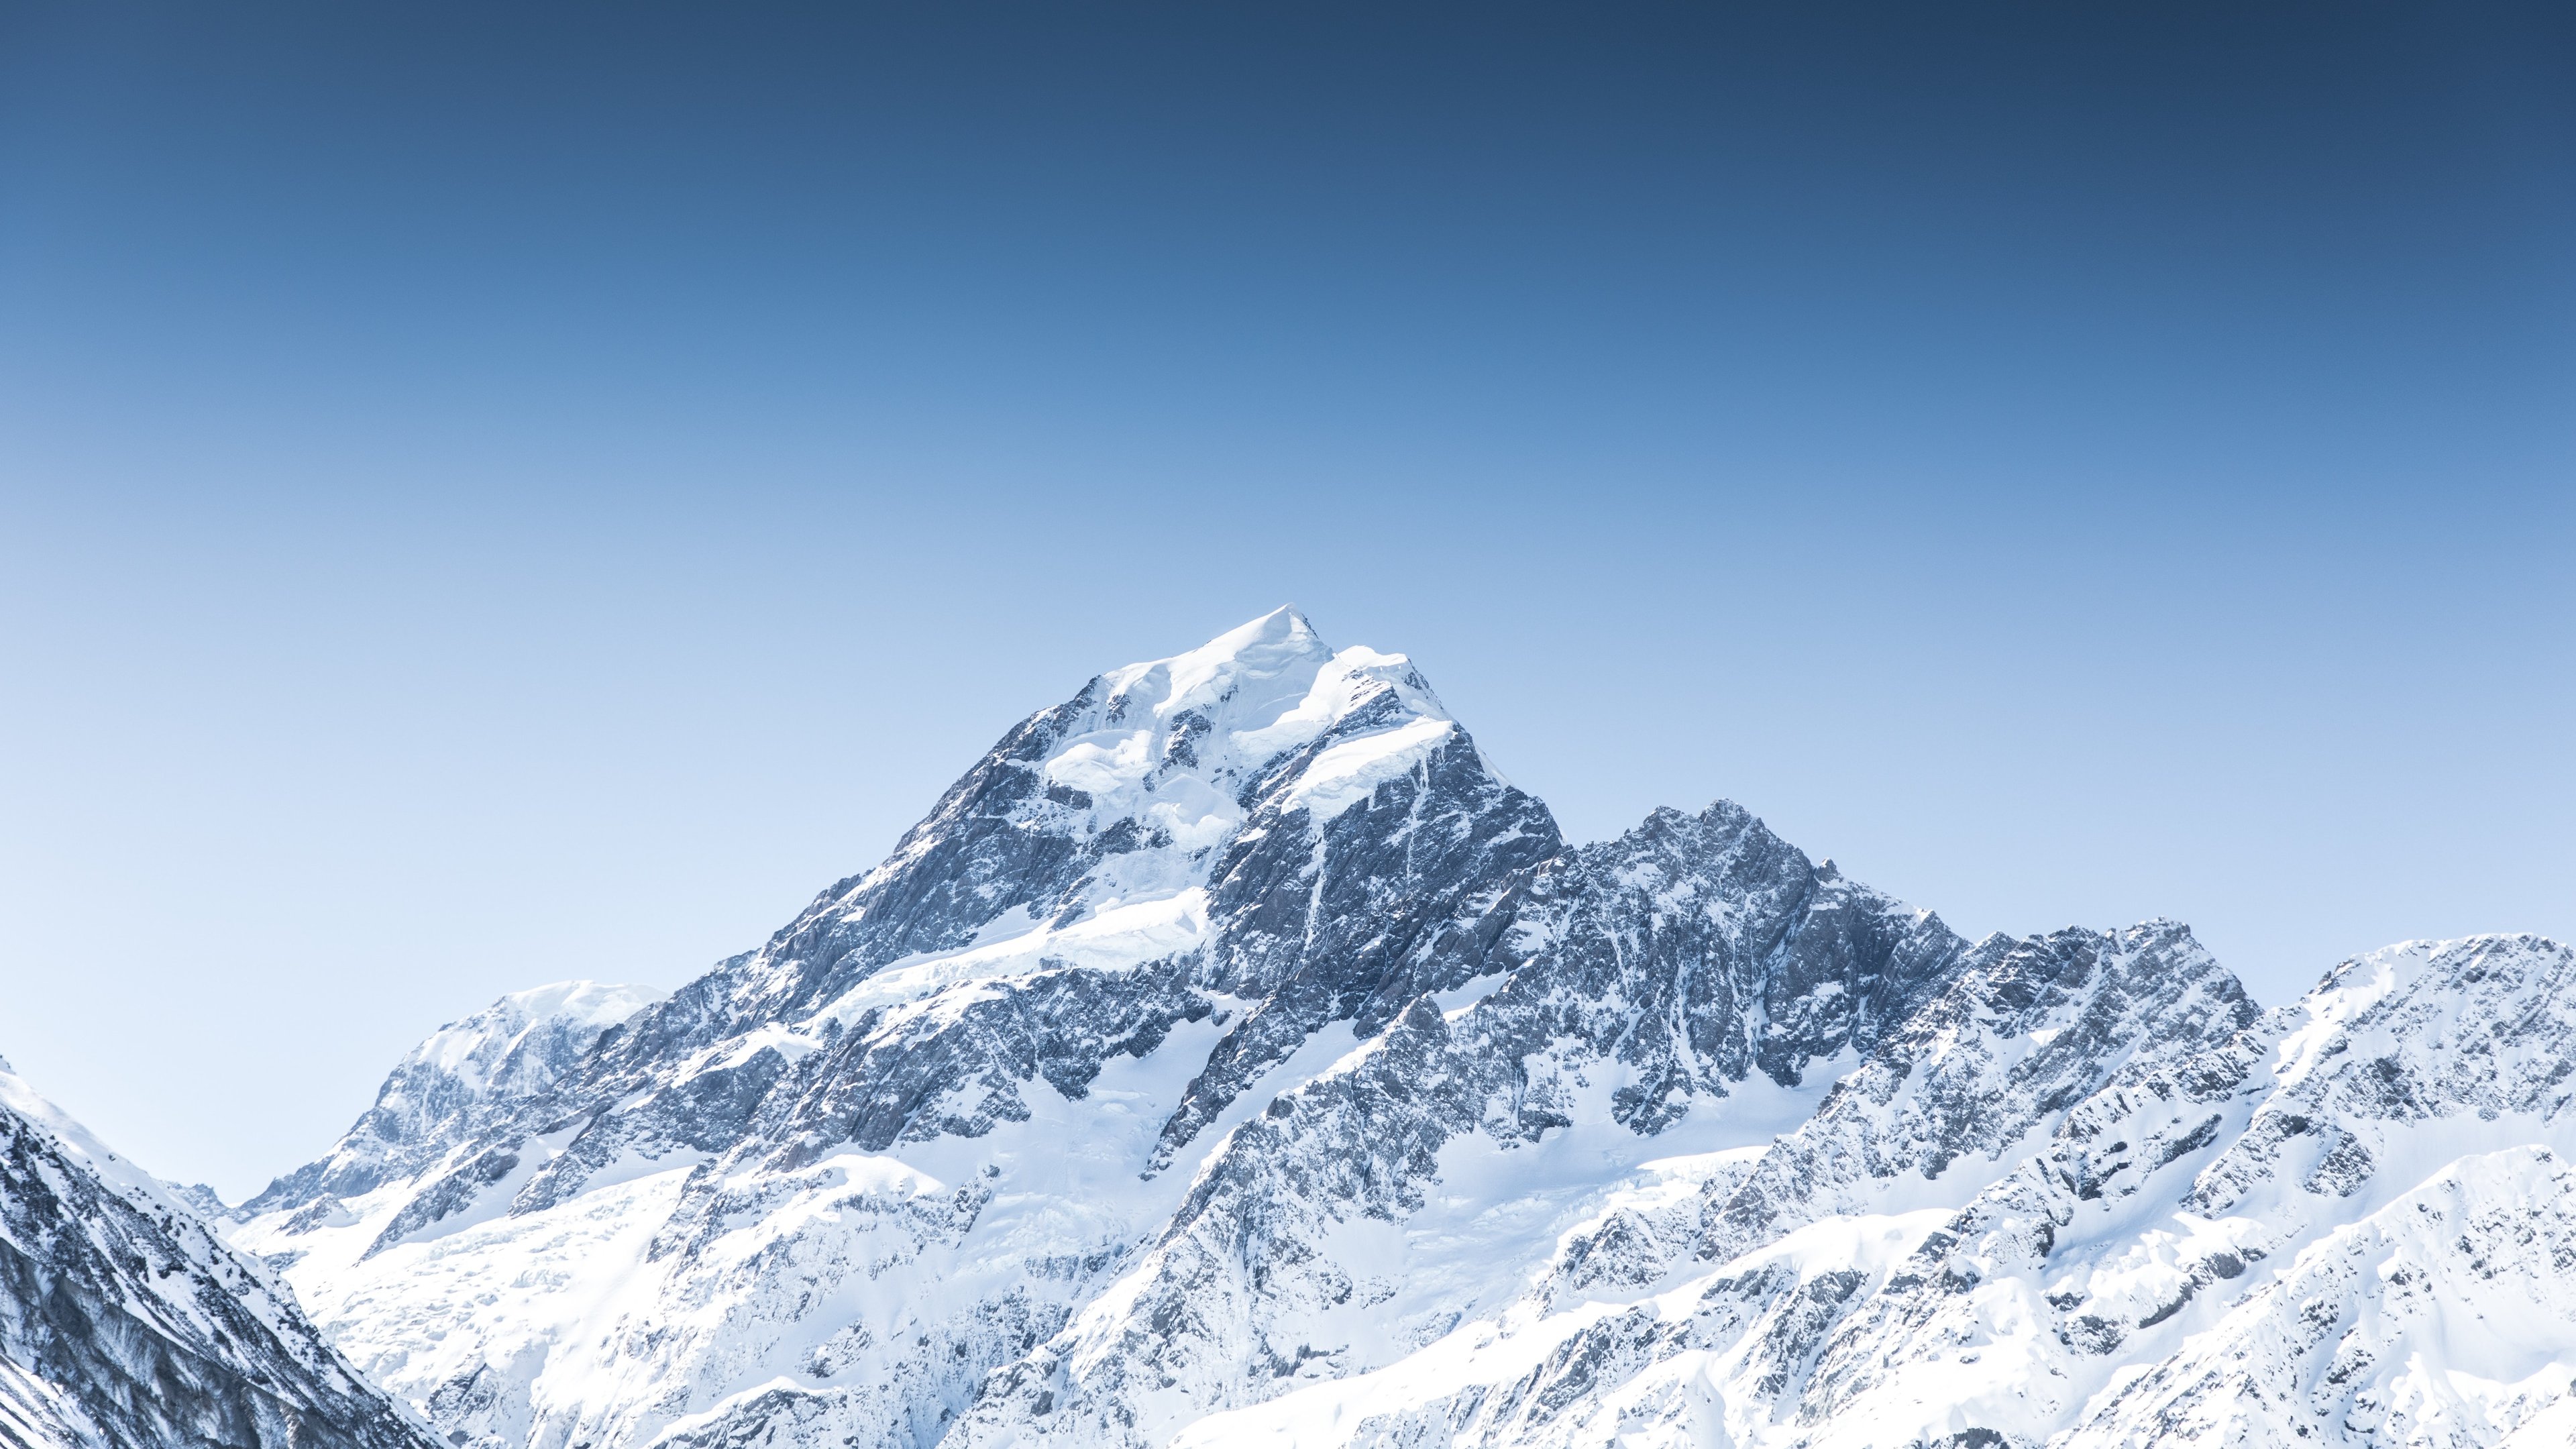 General 3840x2160 nature landscape mountains sky snowy peak rocks snow clear sky Mount Cook New Zealand